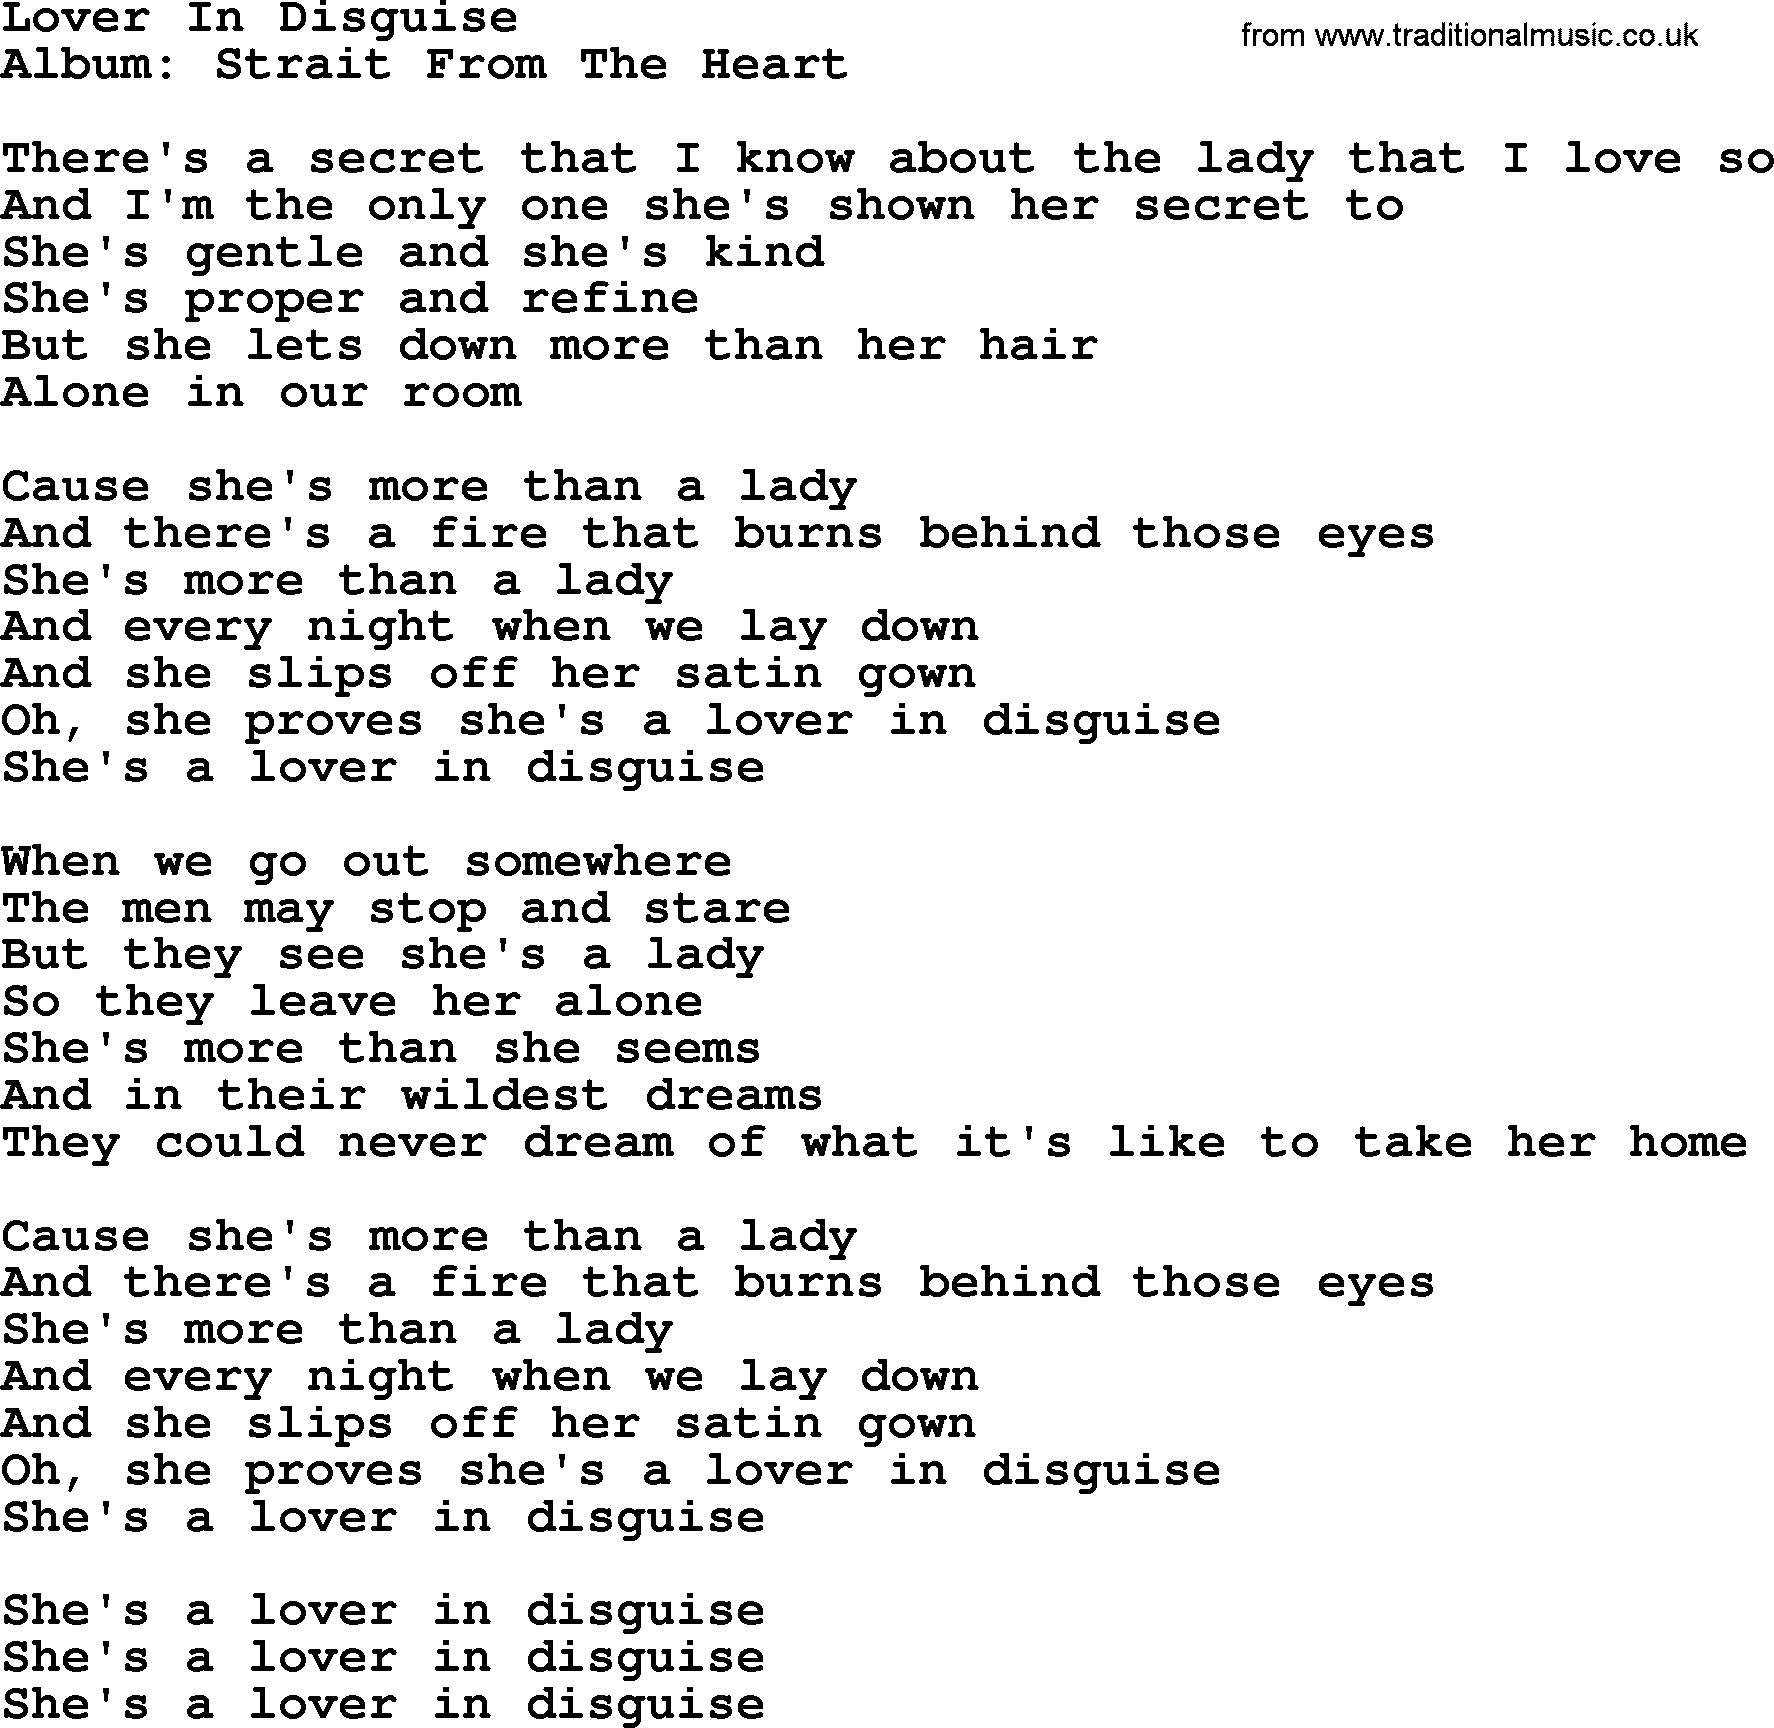 George Strait song: Lover In Disguise, lyrics